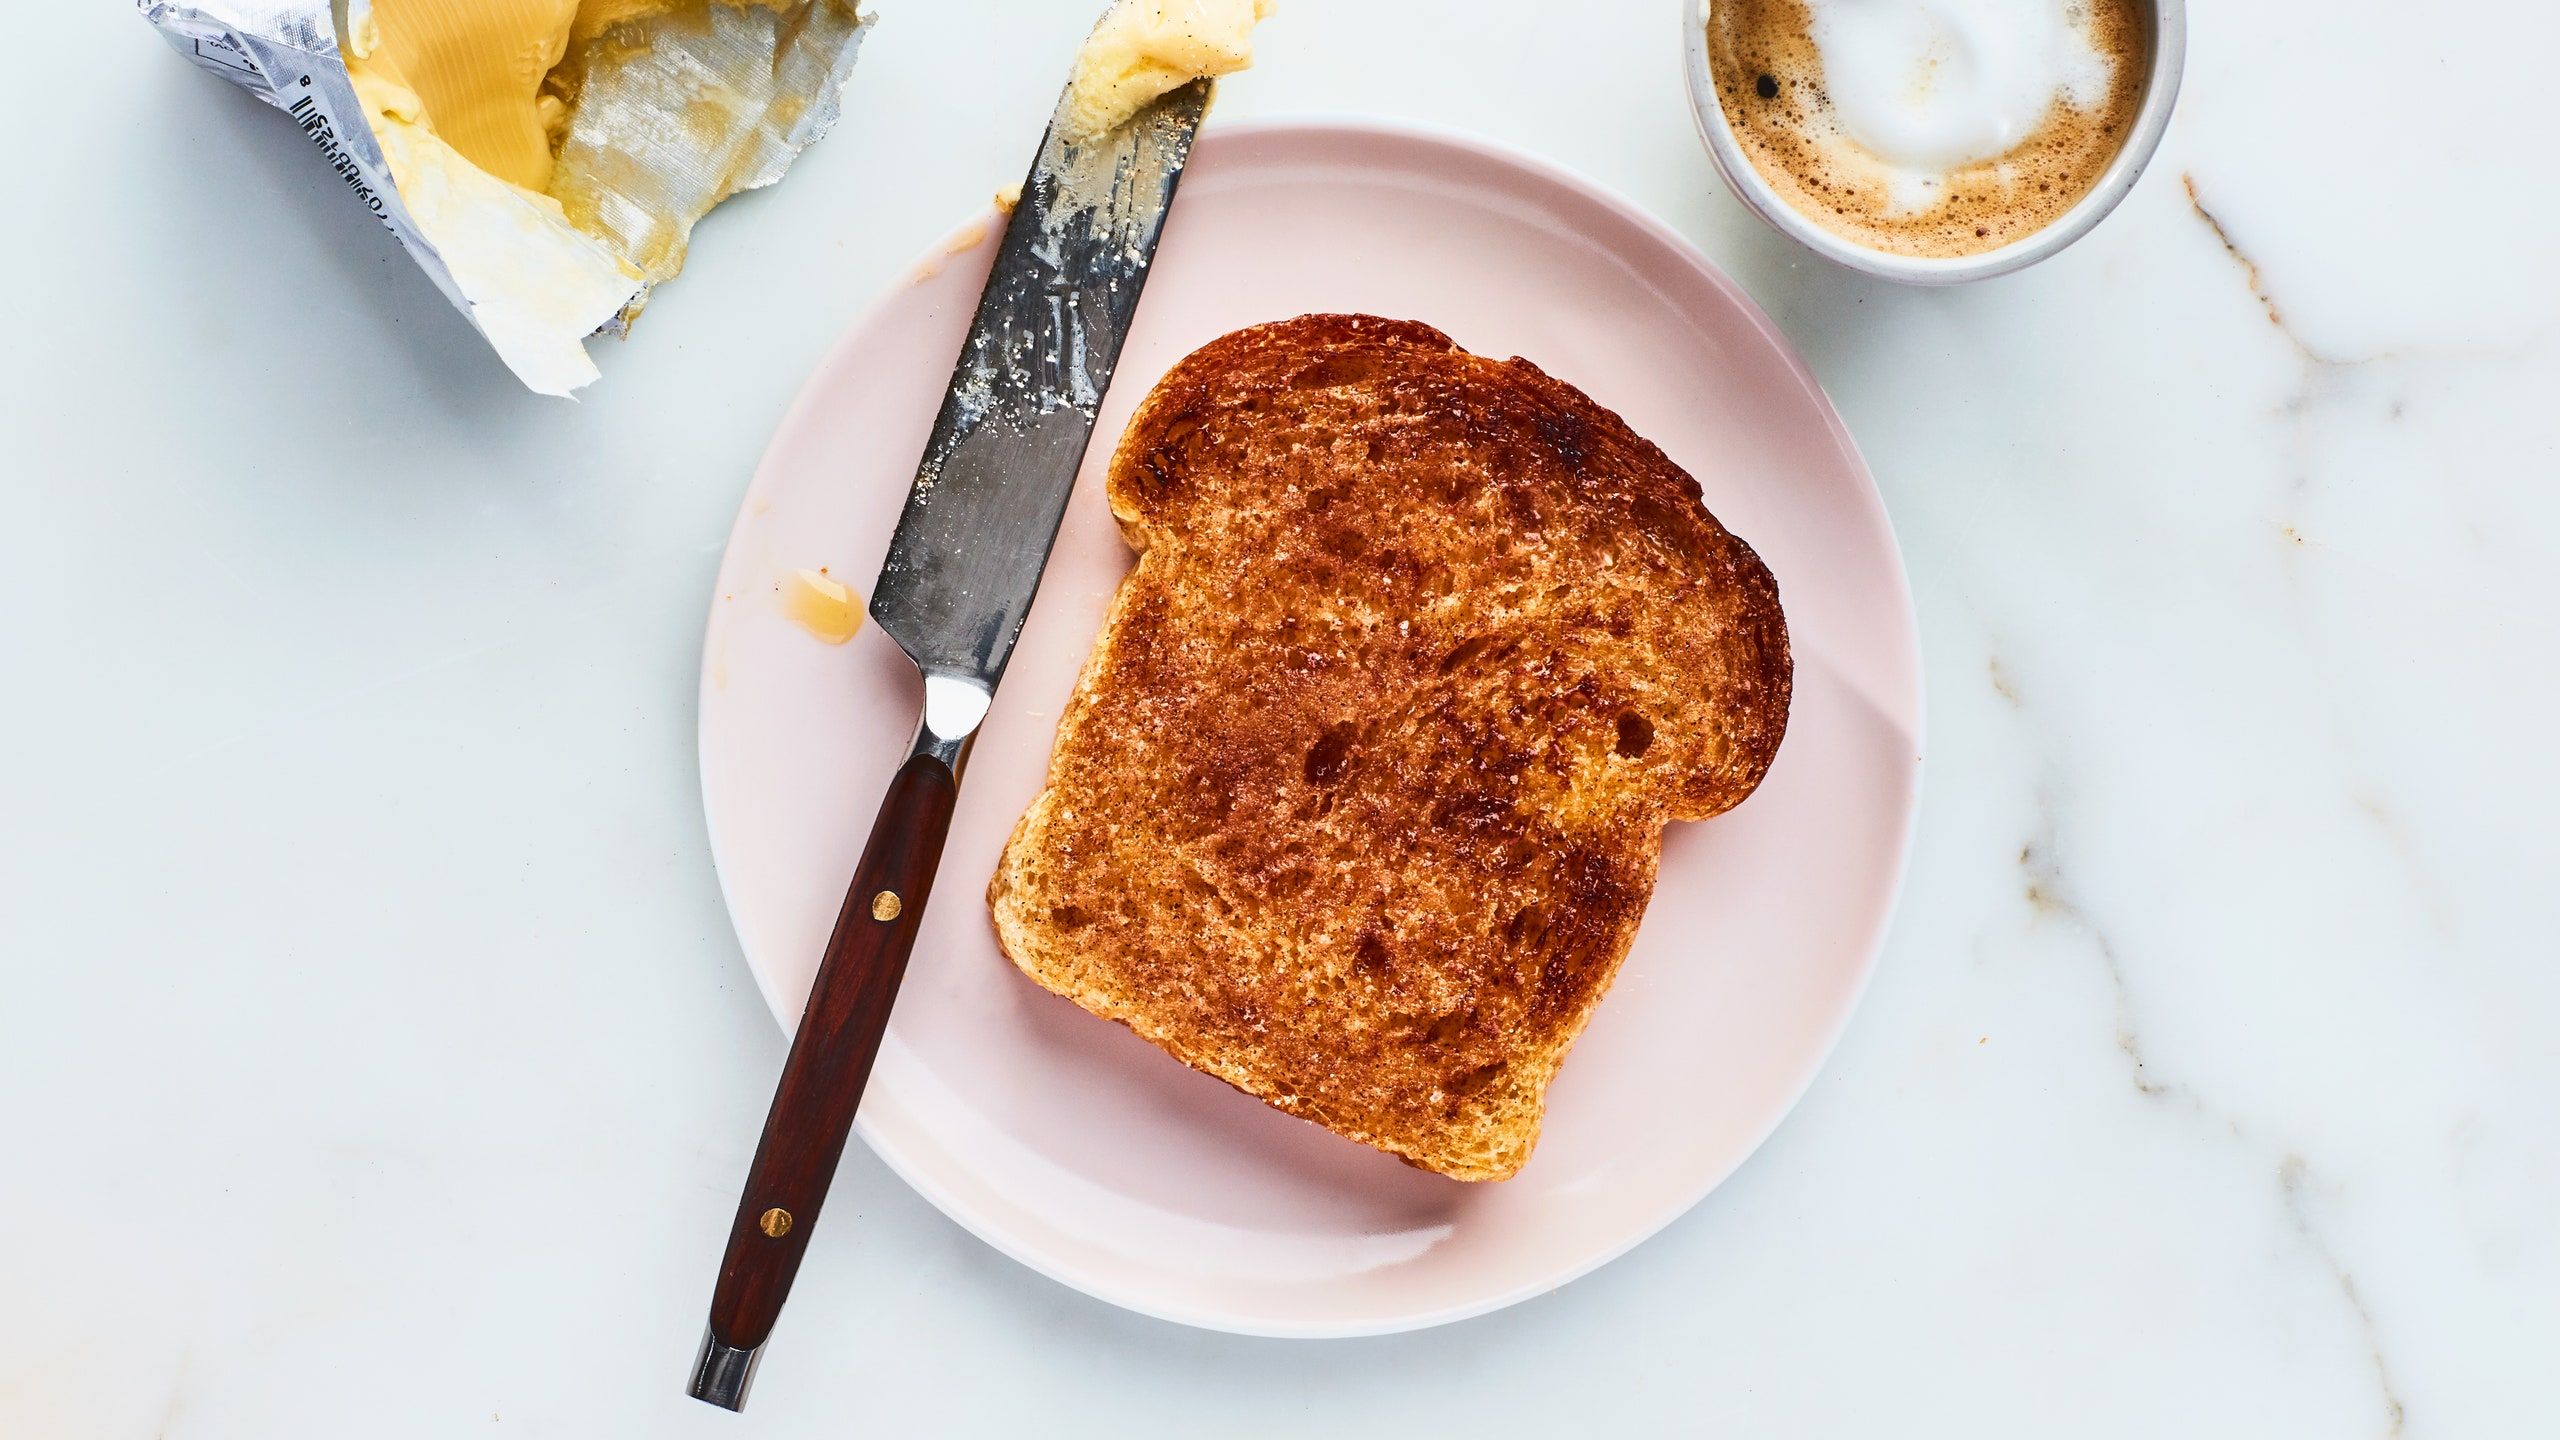 Butter Your Bread Before Your Toast It .epicurious.com